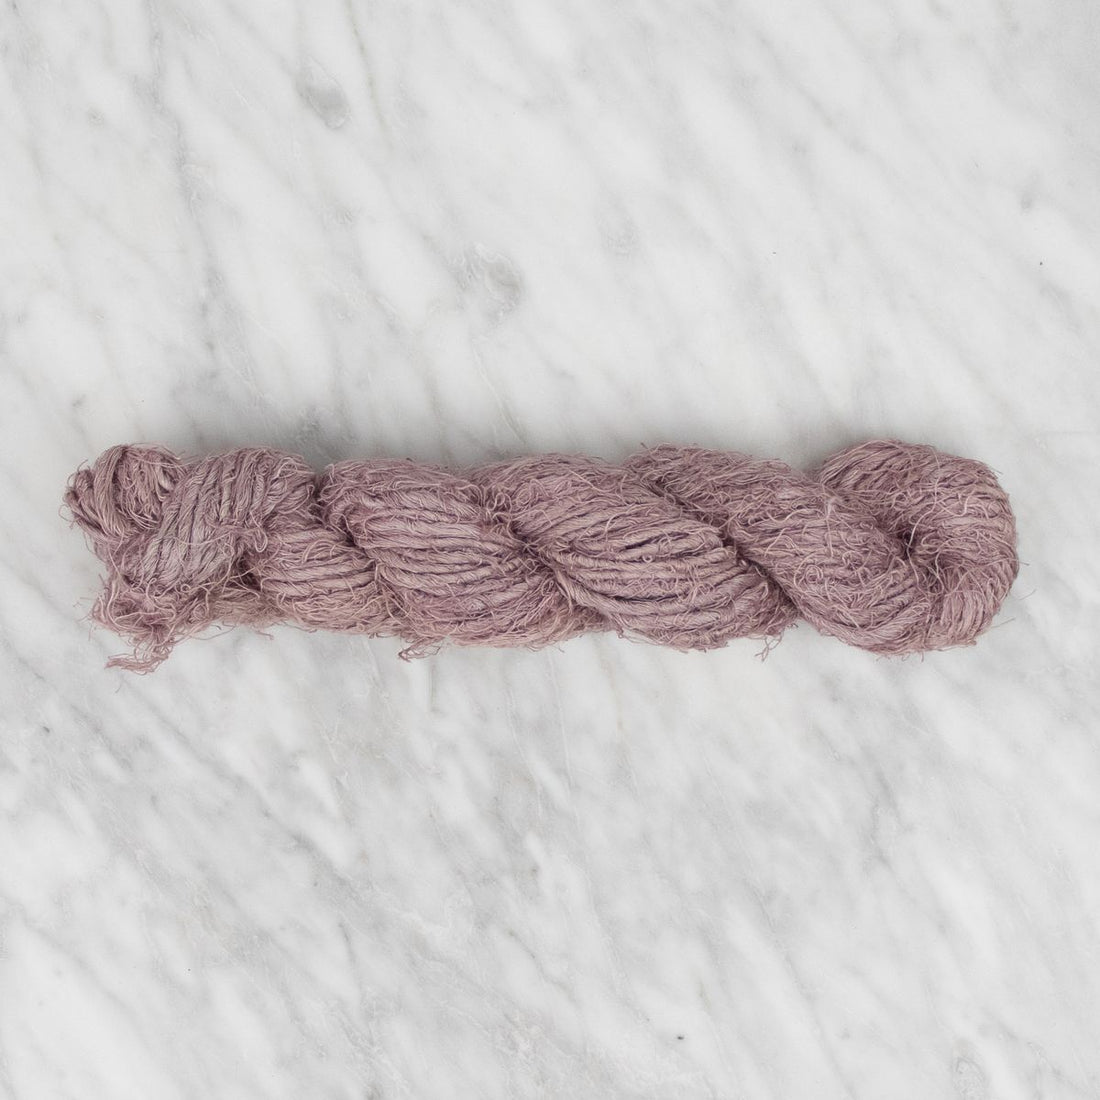 Recycled Linen Yarn - Orchid Haze